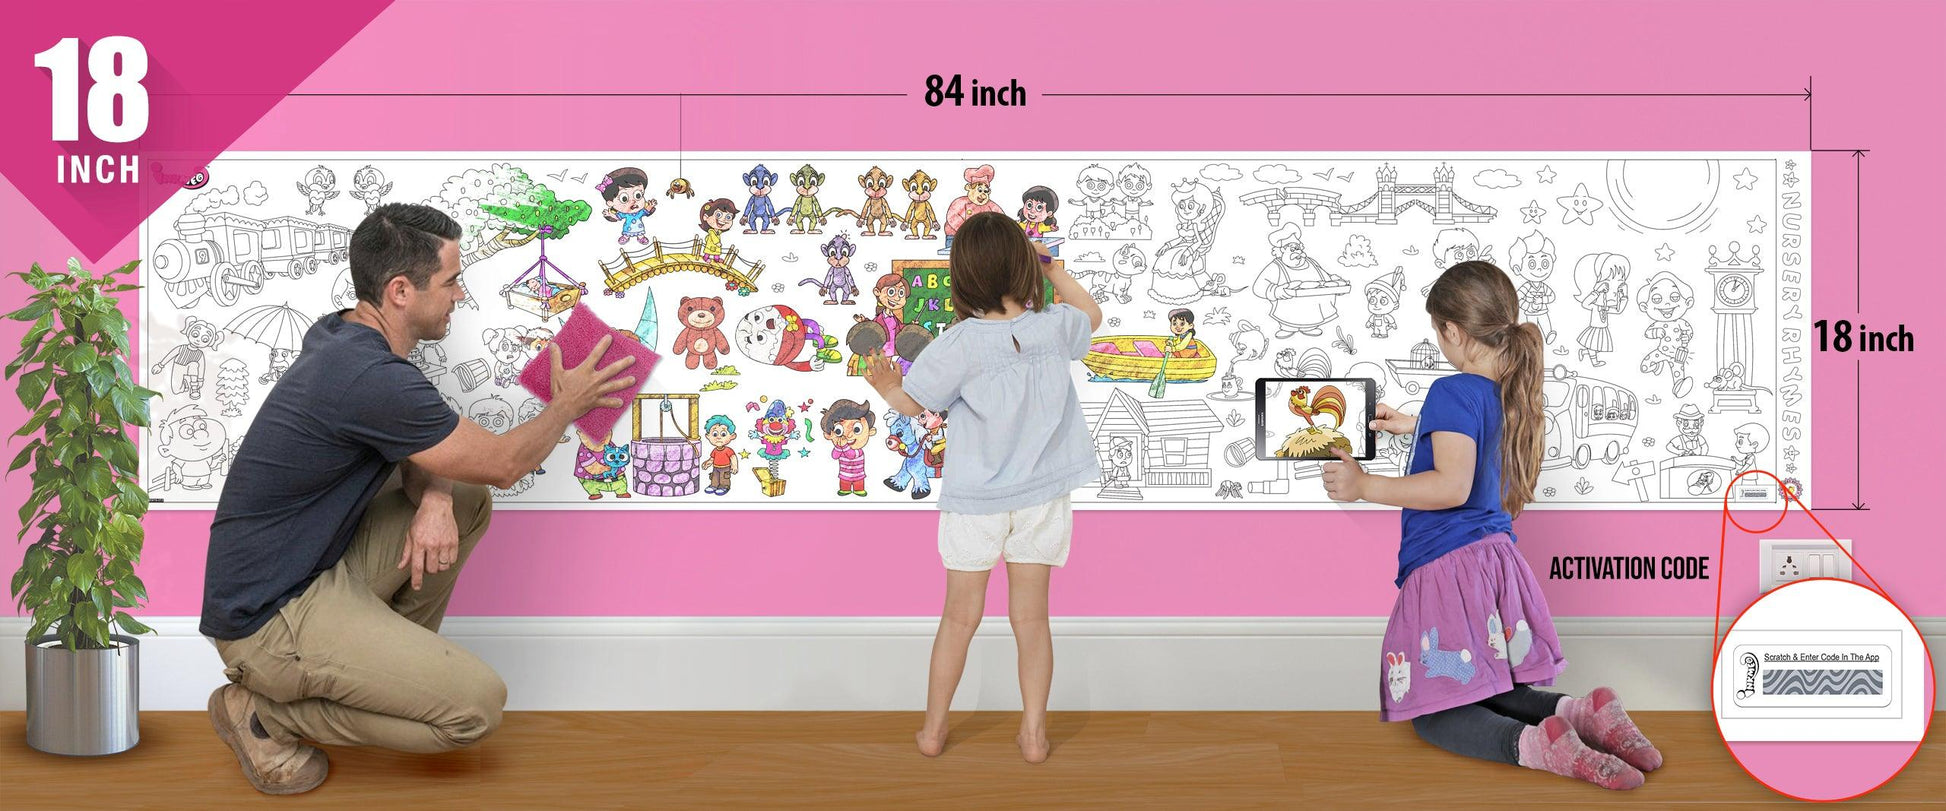 The image shows in pink backdrop a father with his two daughter colouring and bonding with each other in the sheet sticked to the wall.